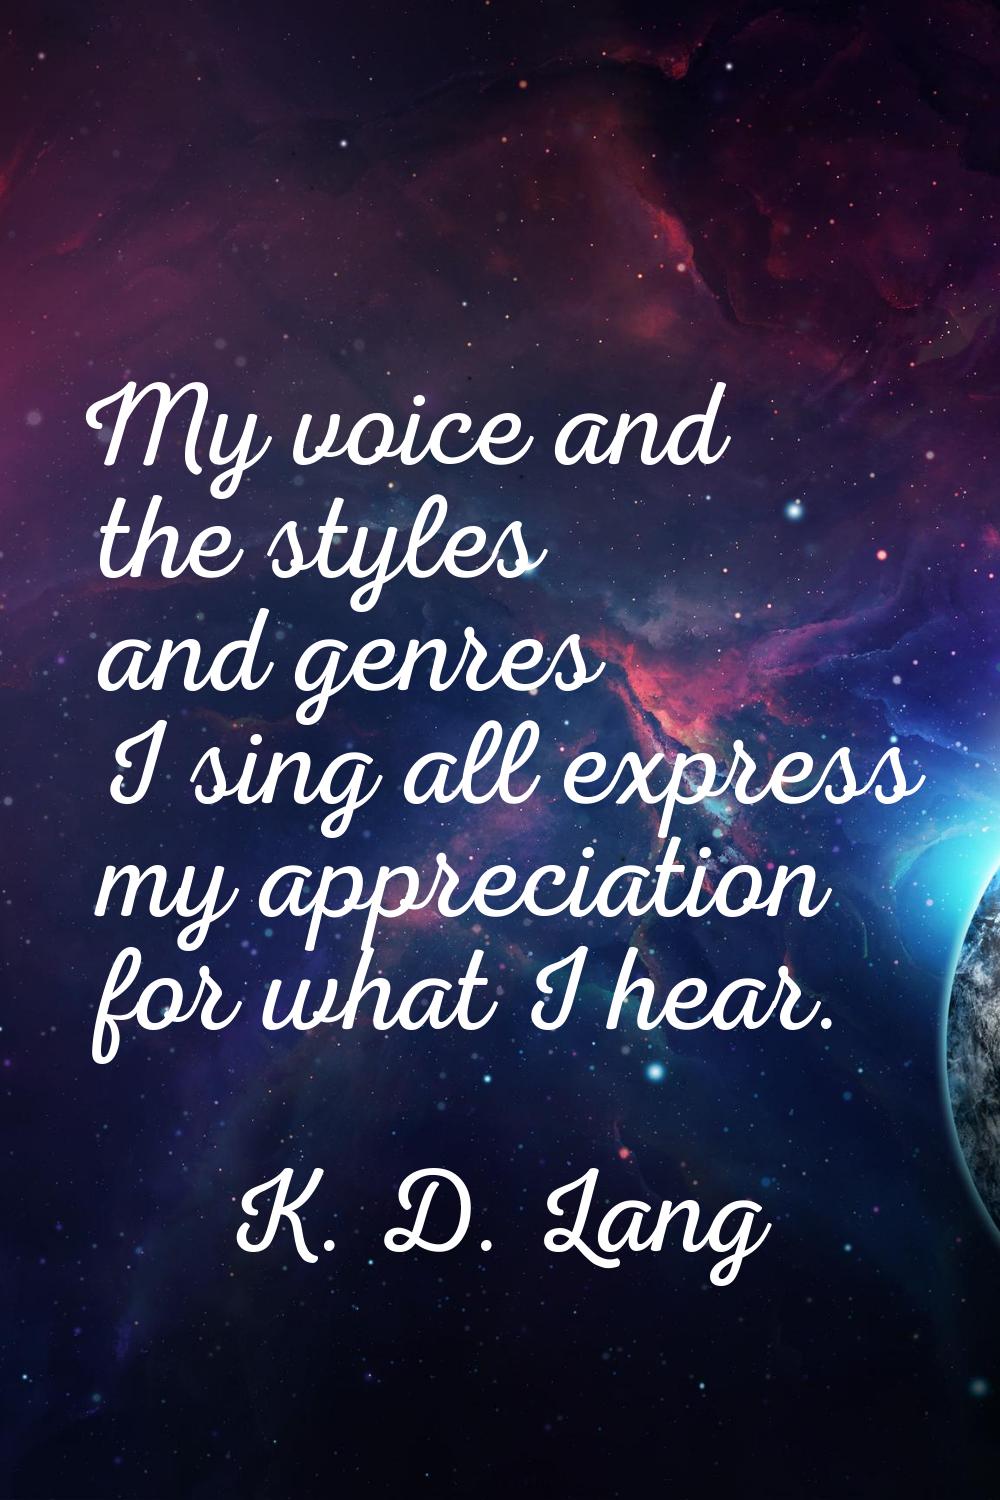 My voice and the styles and genres I sing all express my appreciation for what I hear.